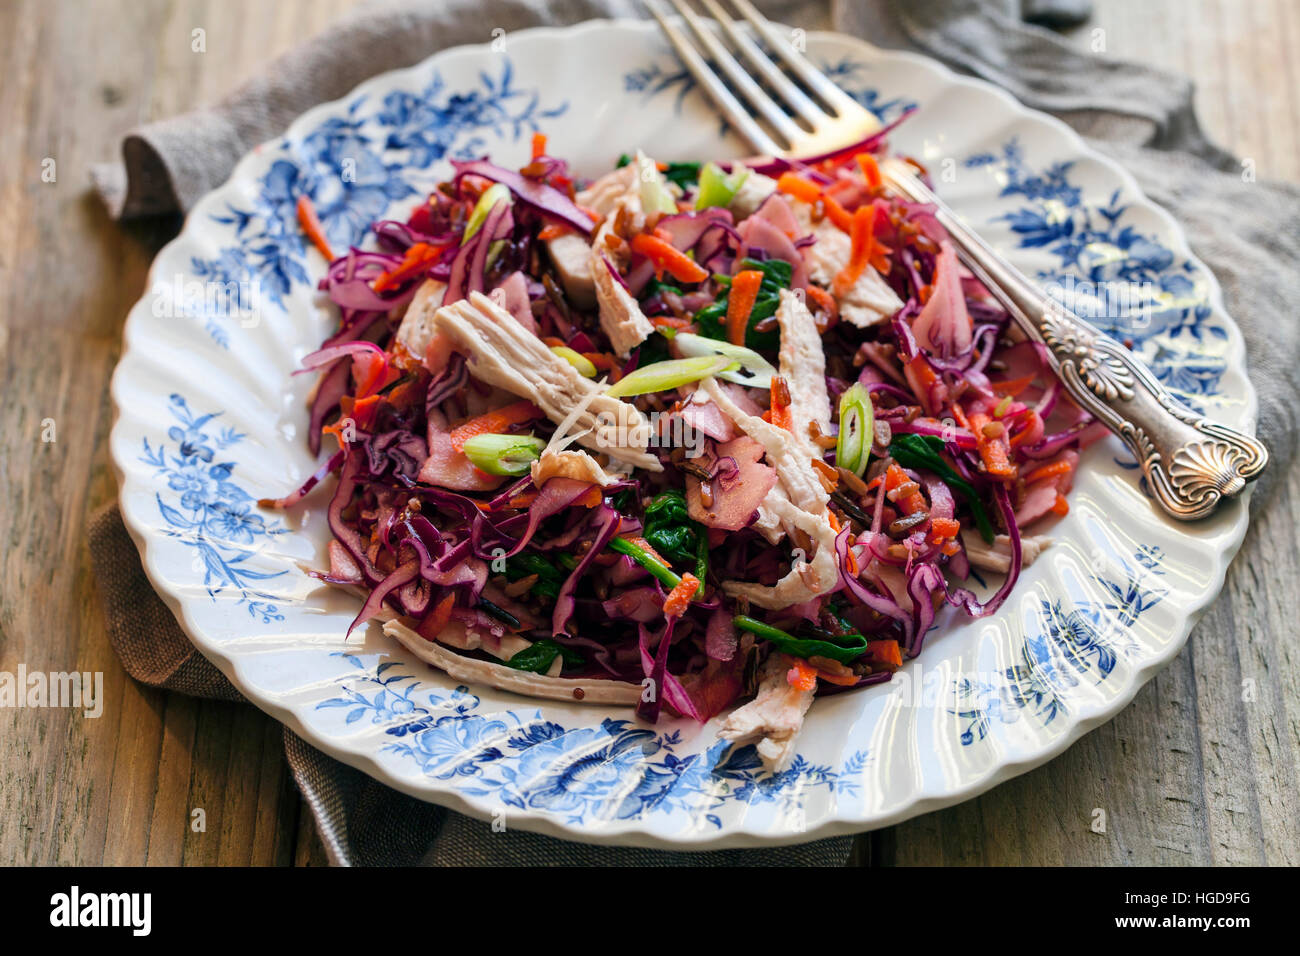 Salad with leftover turkey, red cabbage, apples and carrots Stock Photo